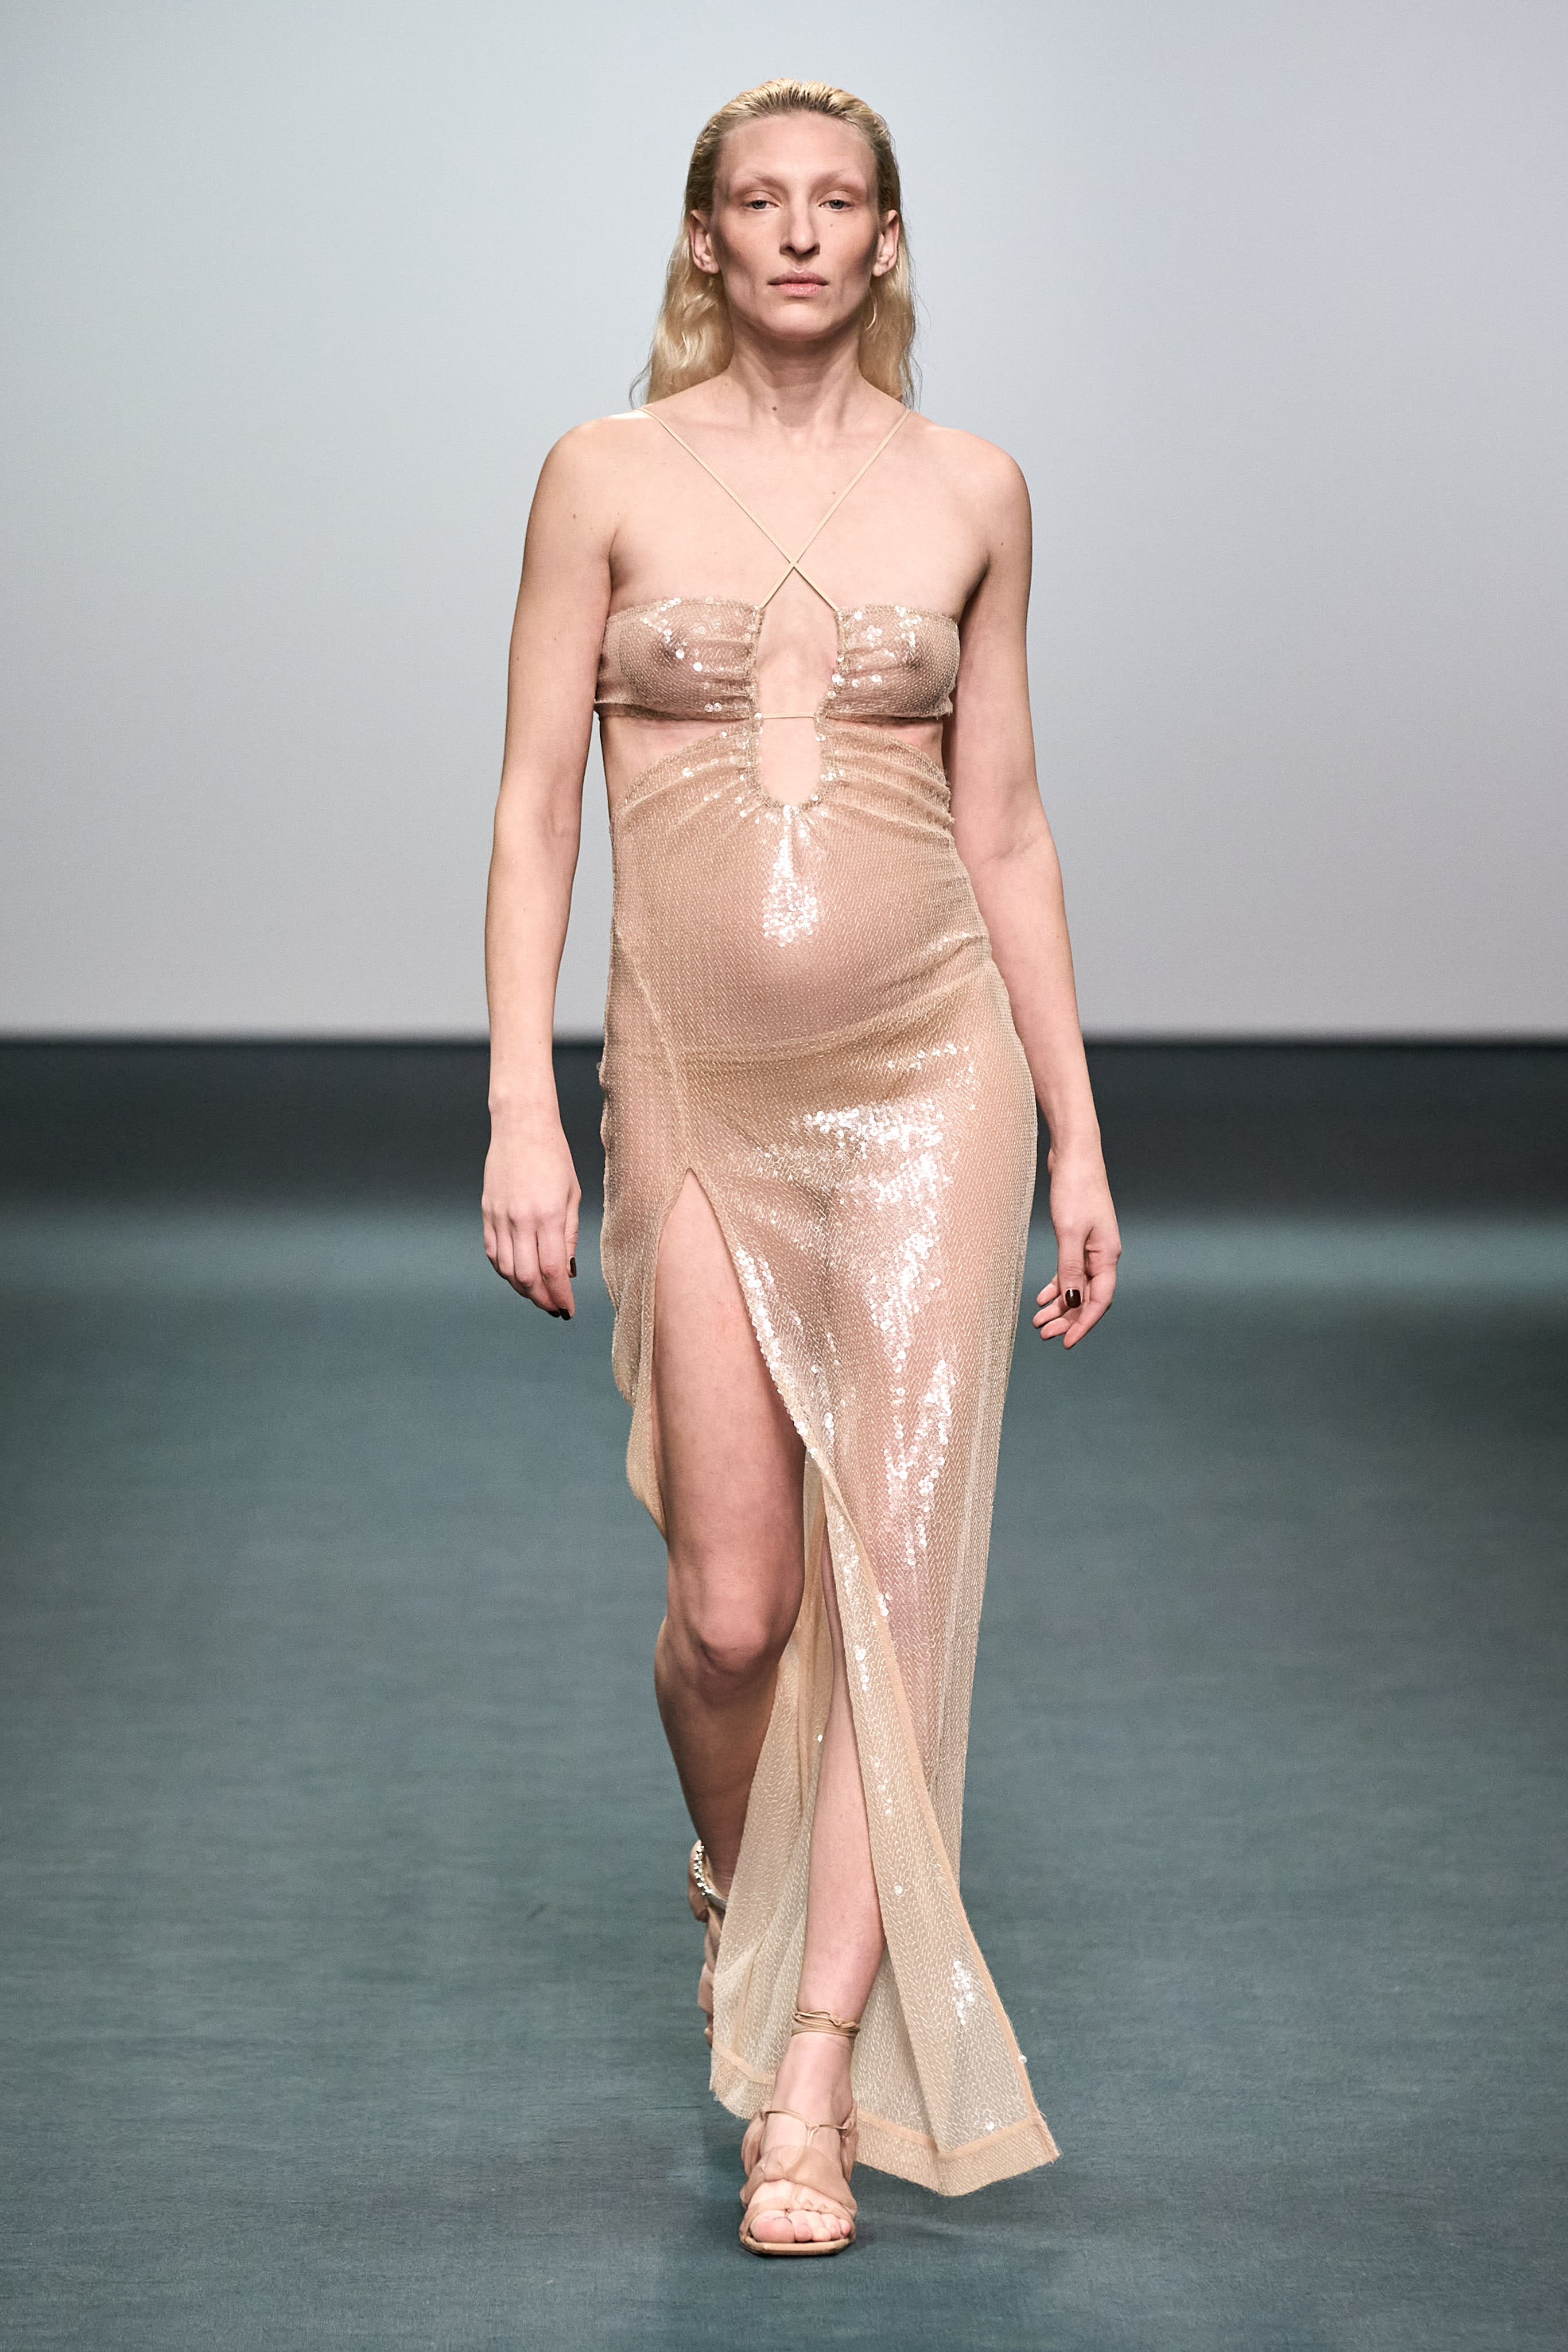 One of the models on the runway at Nensi Dojaka was pregnant